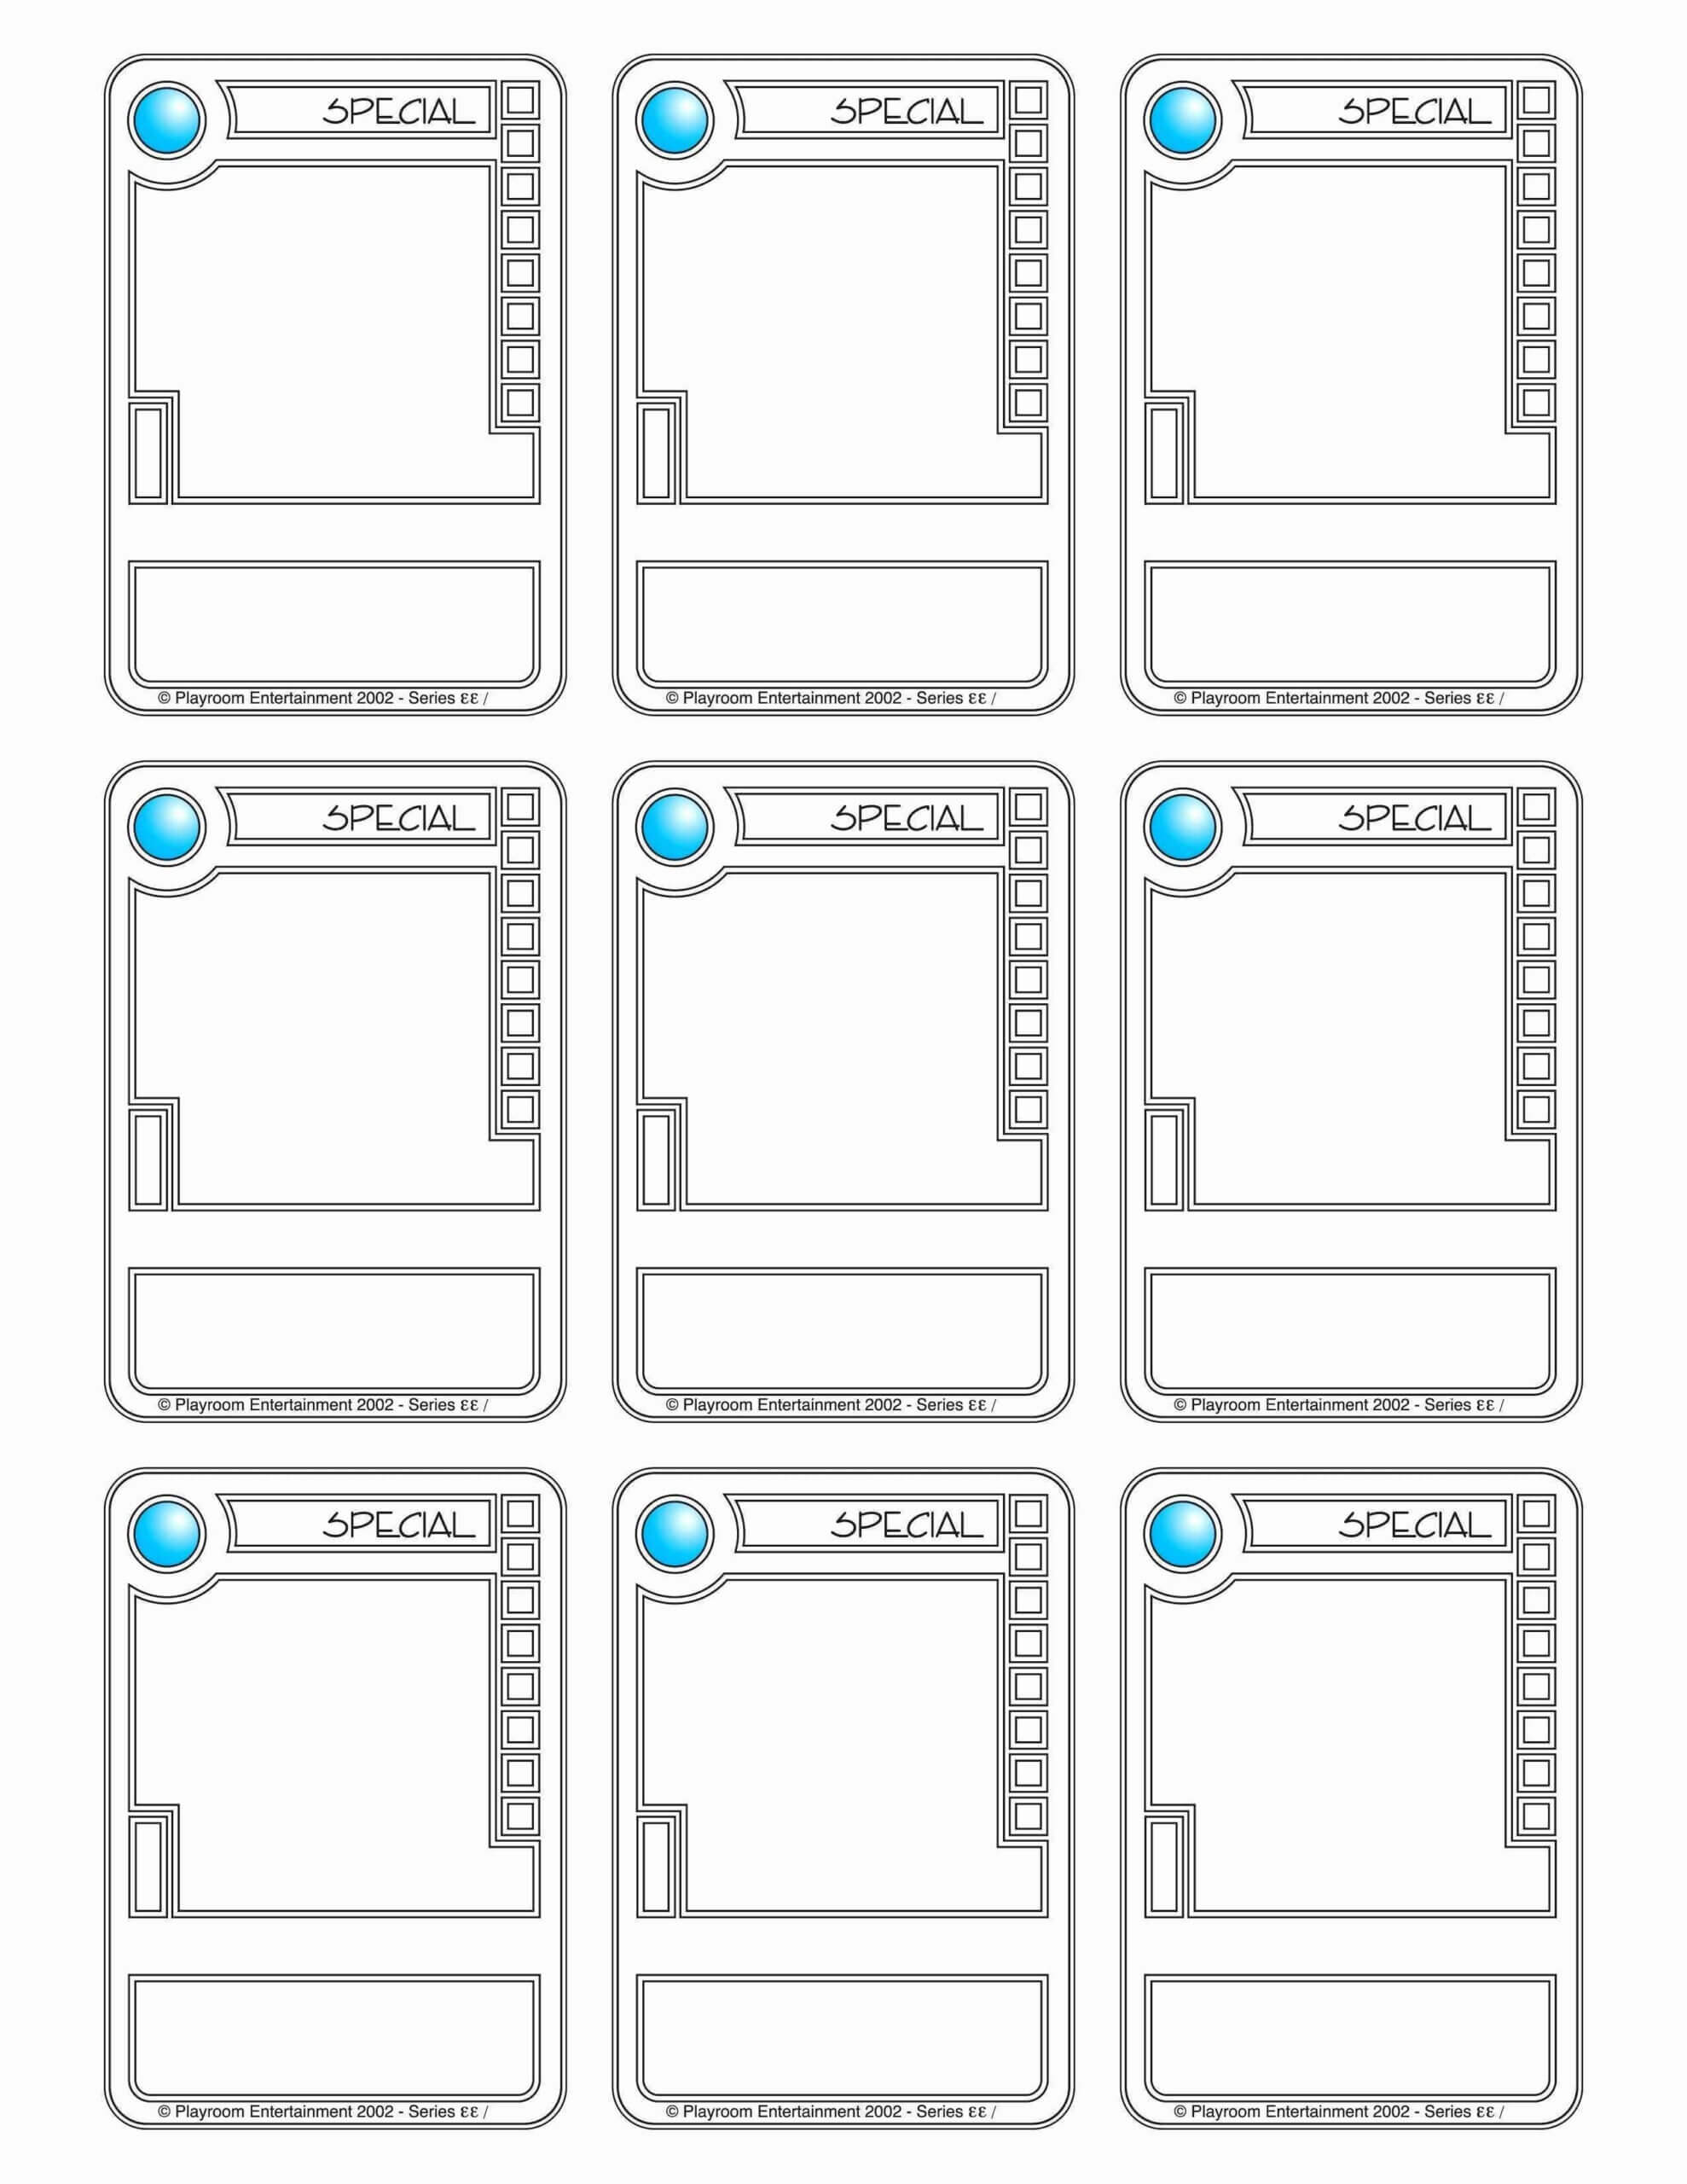 001 Trading Card Maker Free Examples Template For Success In Regarding Card Game Template Maker